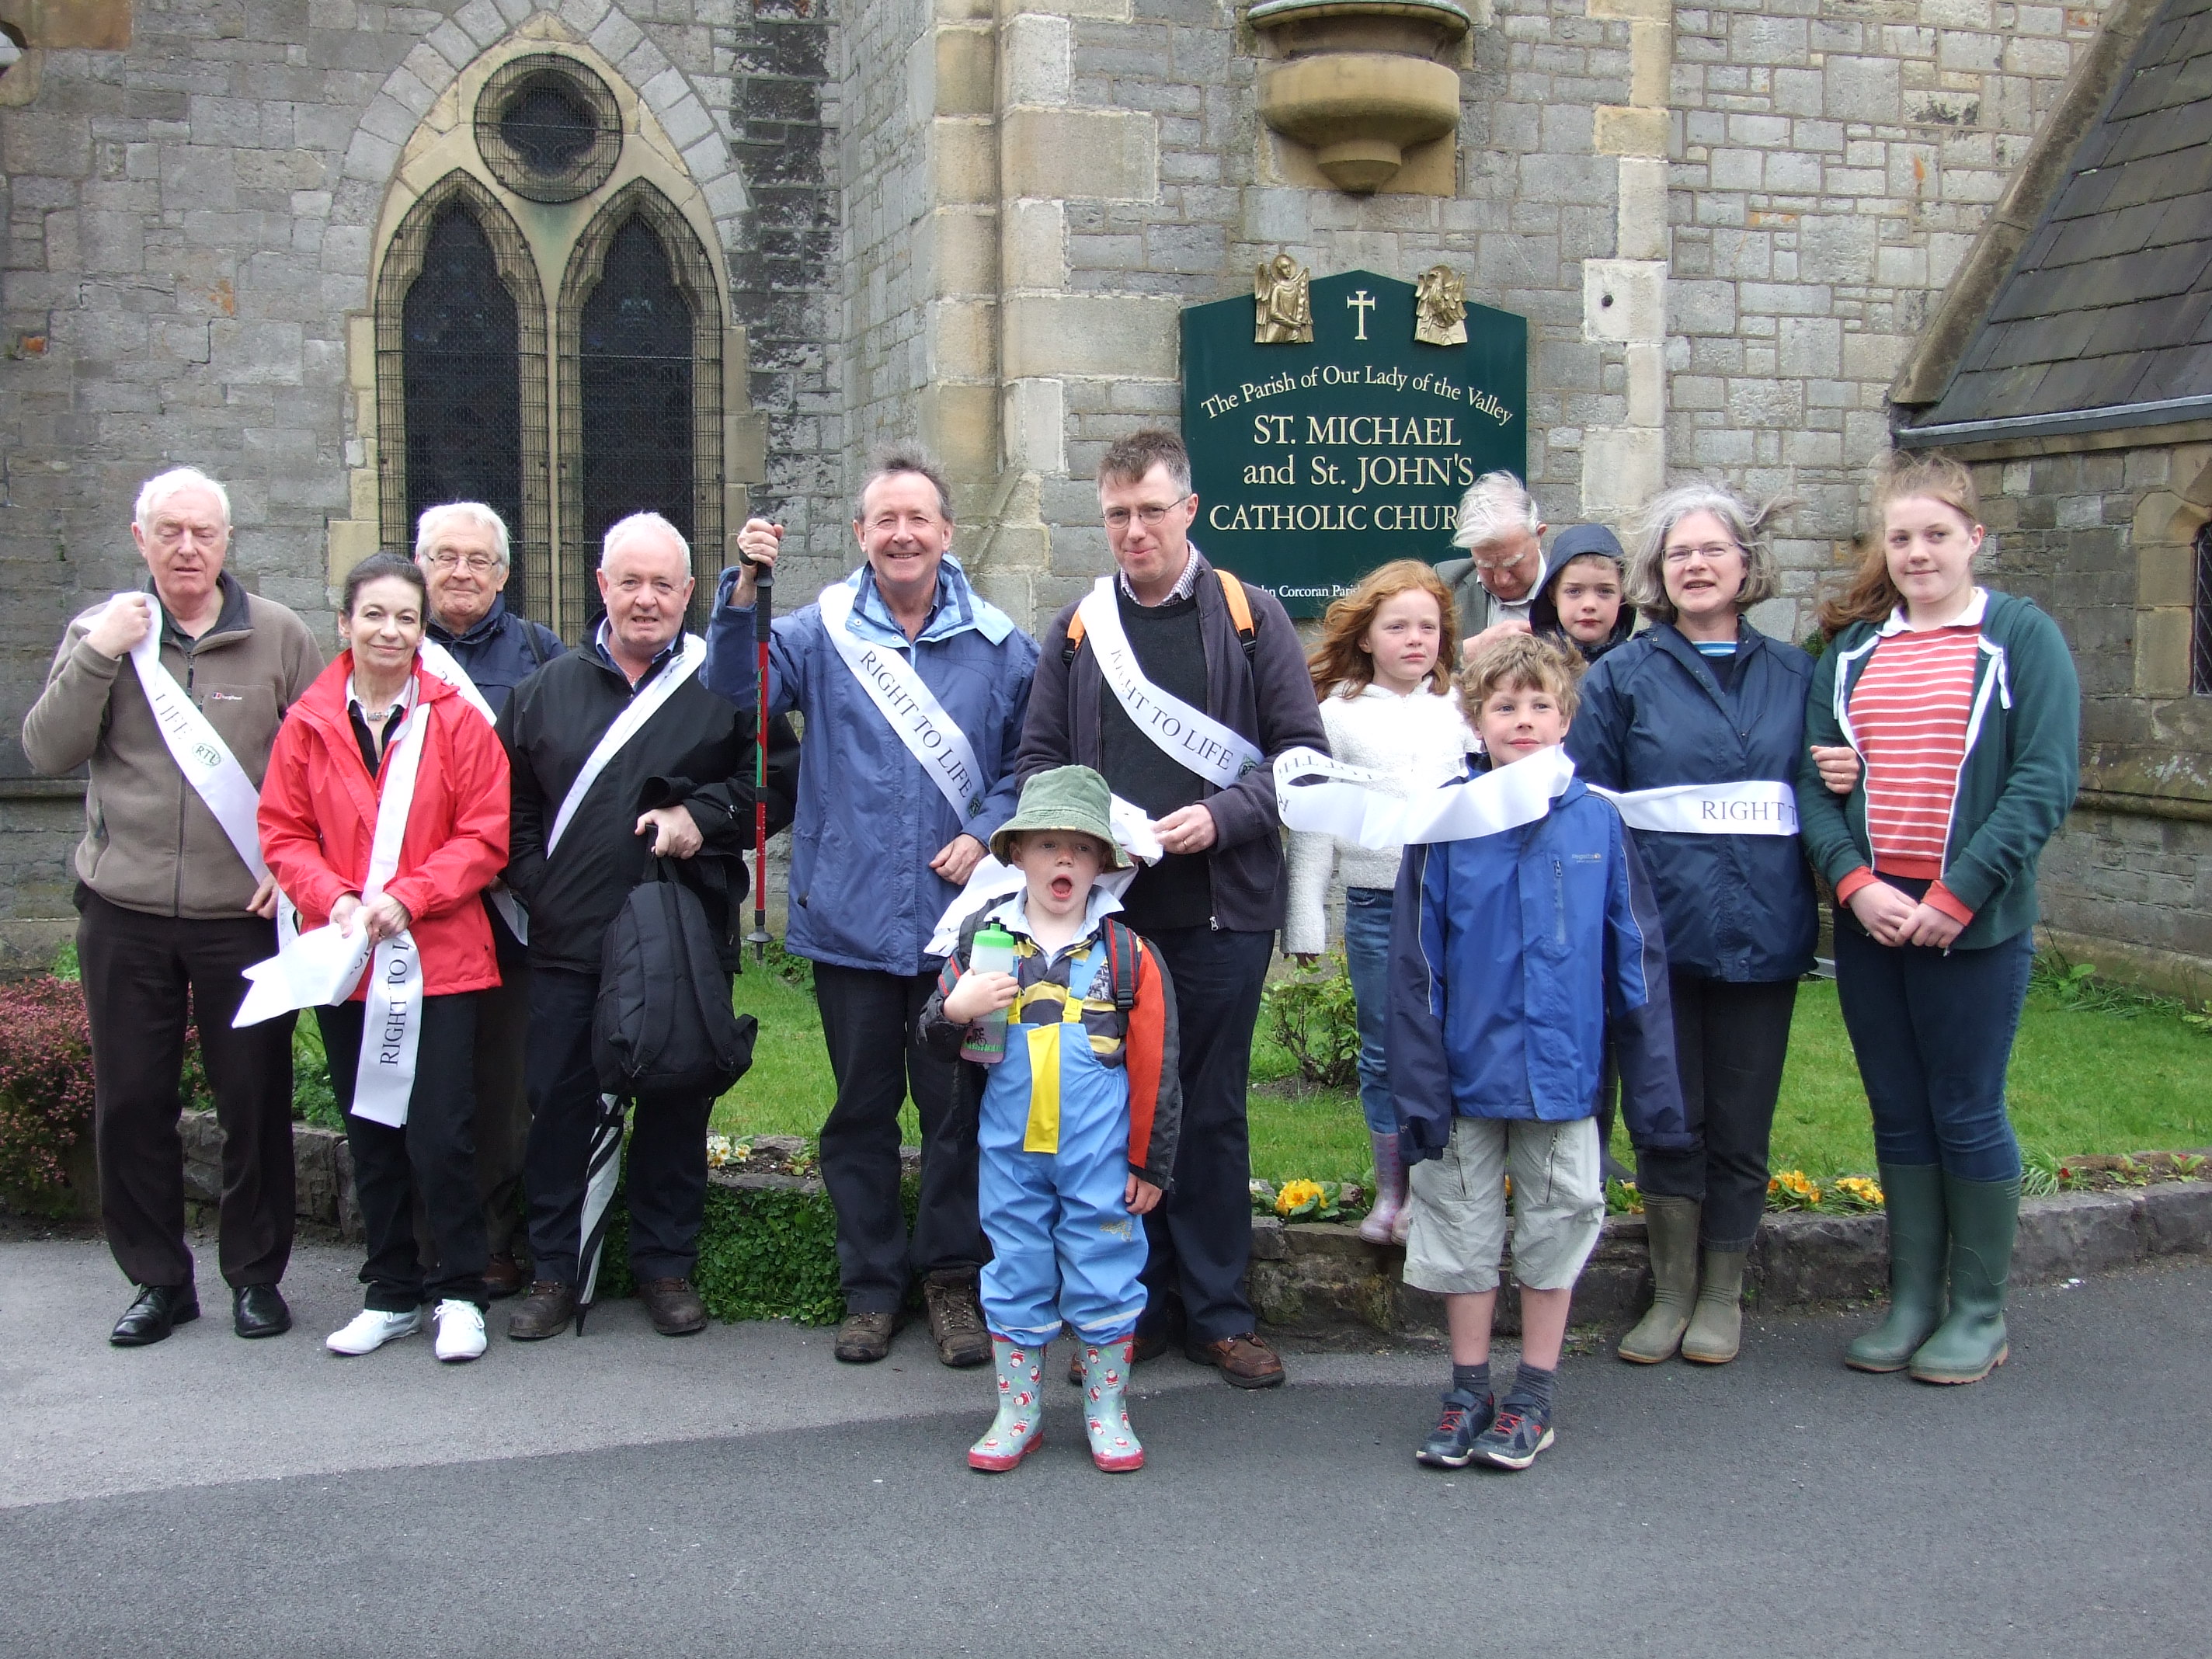 Some of the walkers, at Clitheroe, beginning the Right To Life Memorial Walk In The Ribble Valley On Bank Holiday Monday -  2013